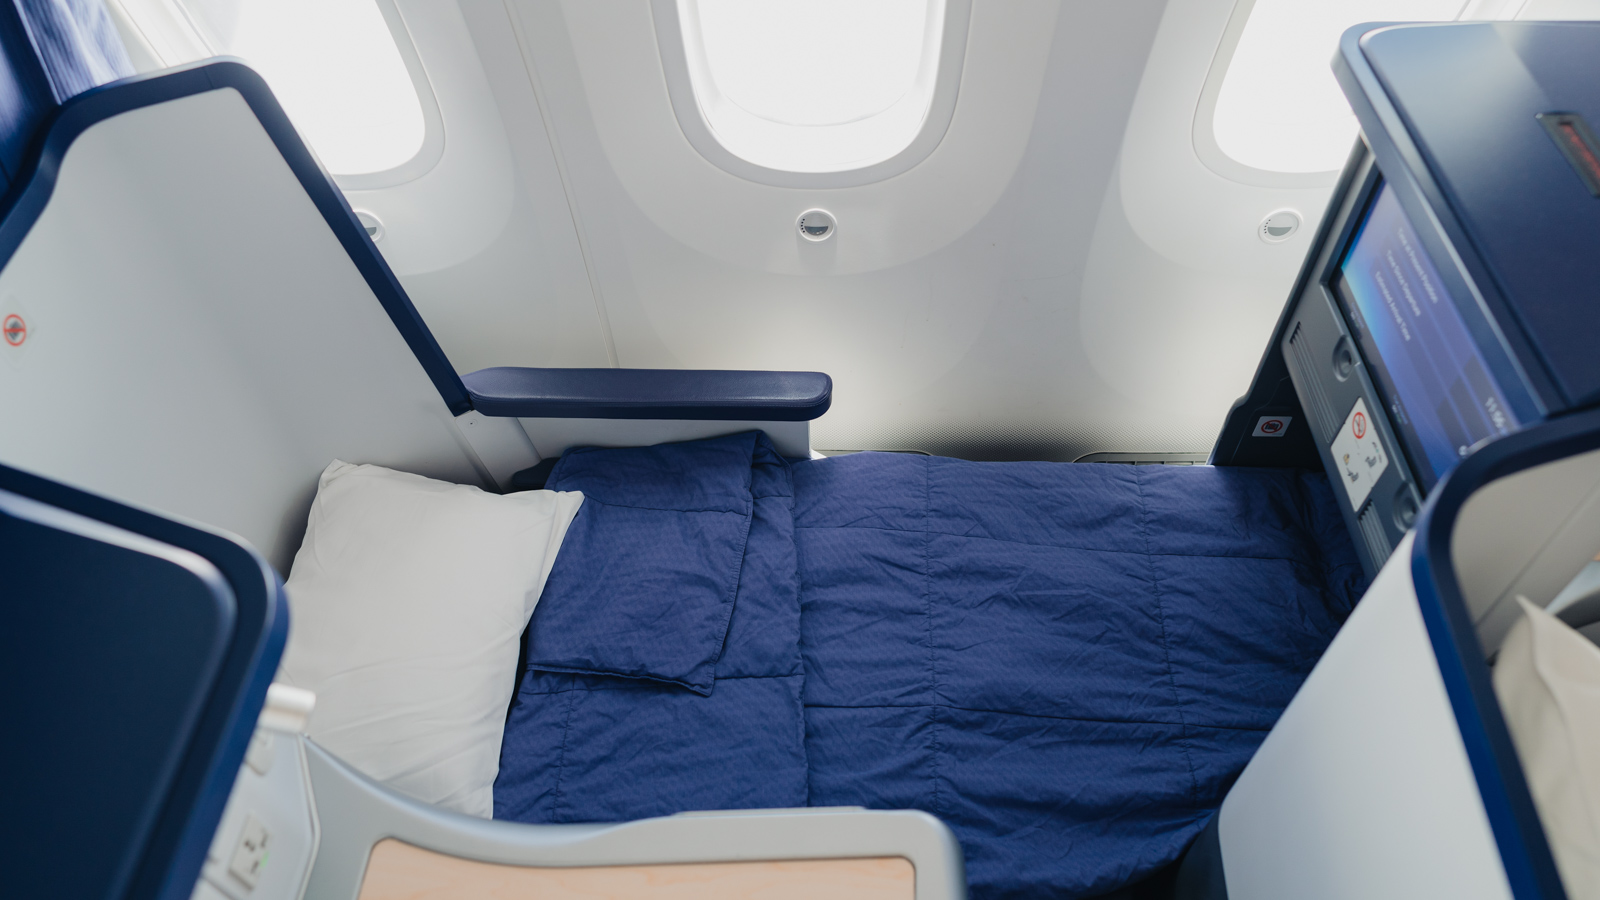 ANA Boeing 787-9 Business Class bed